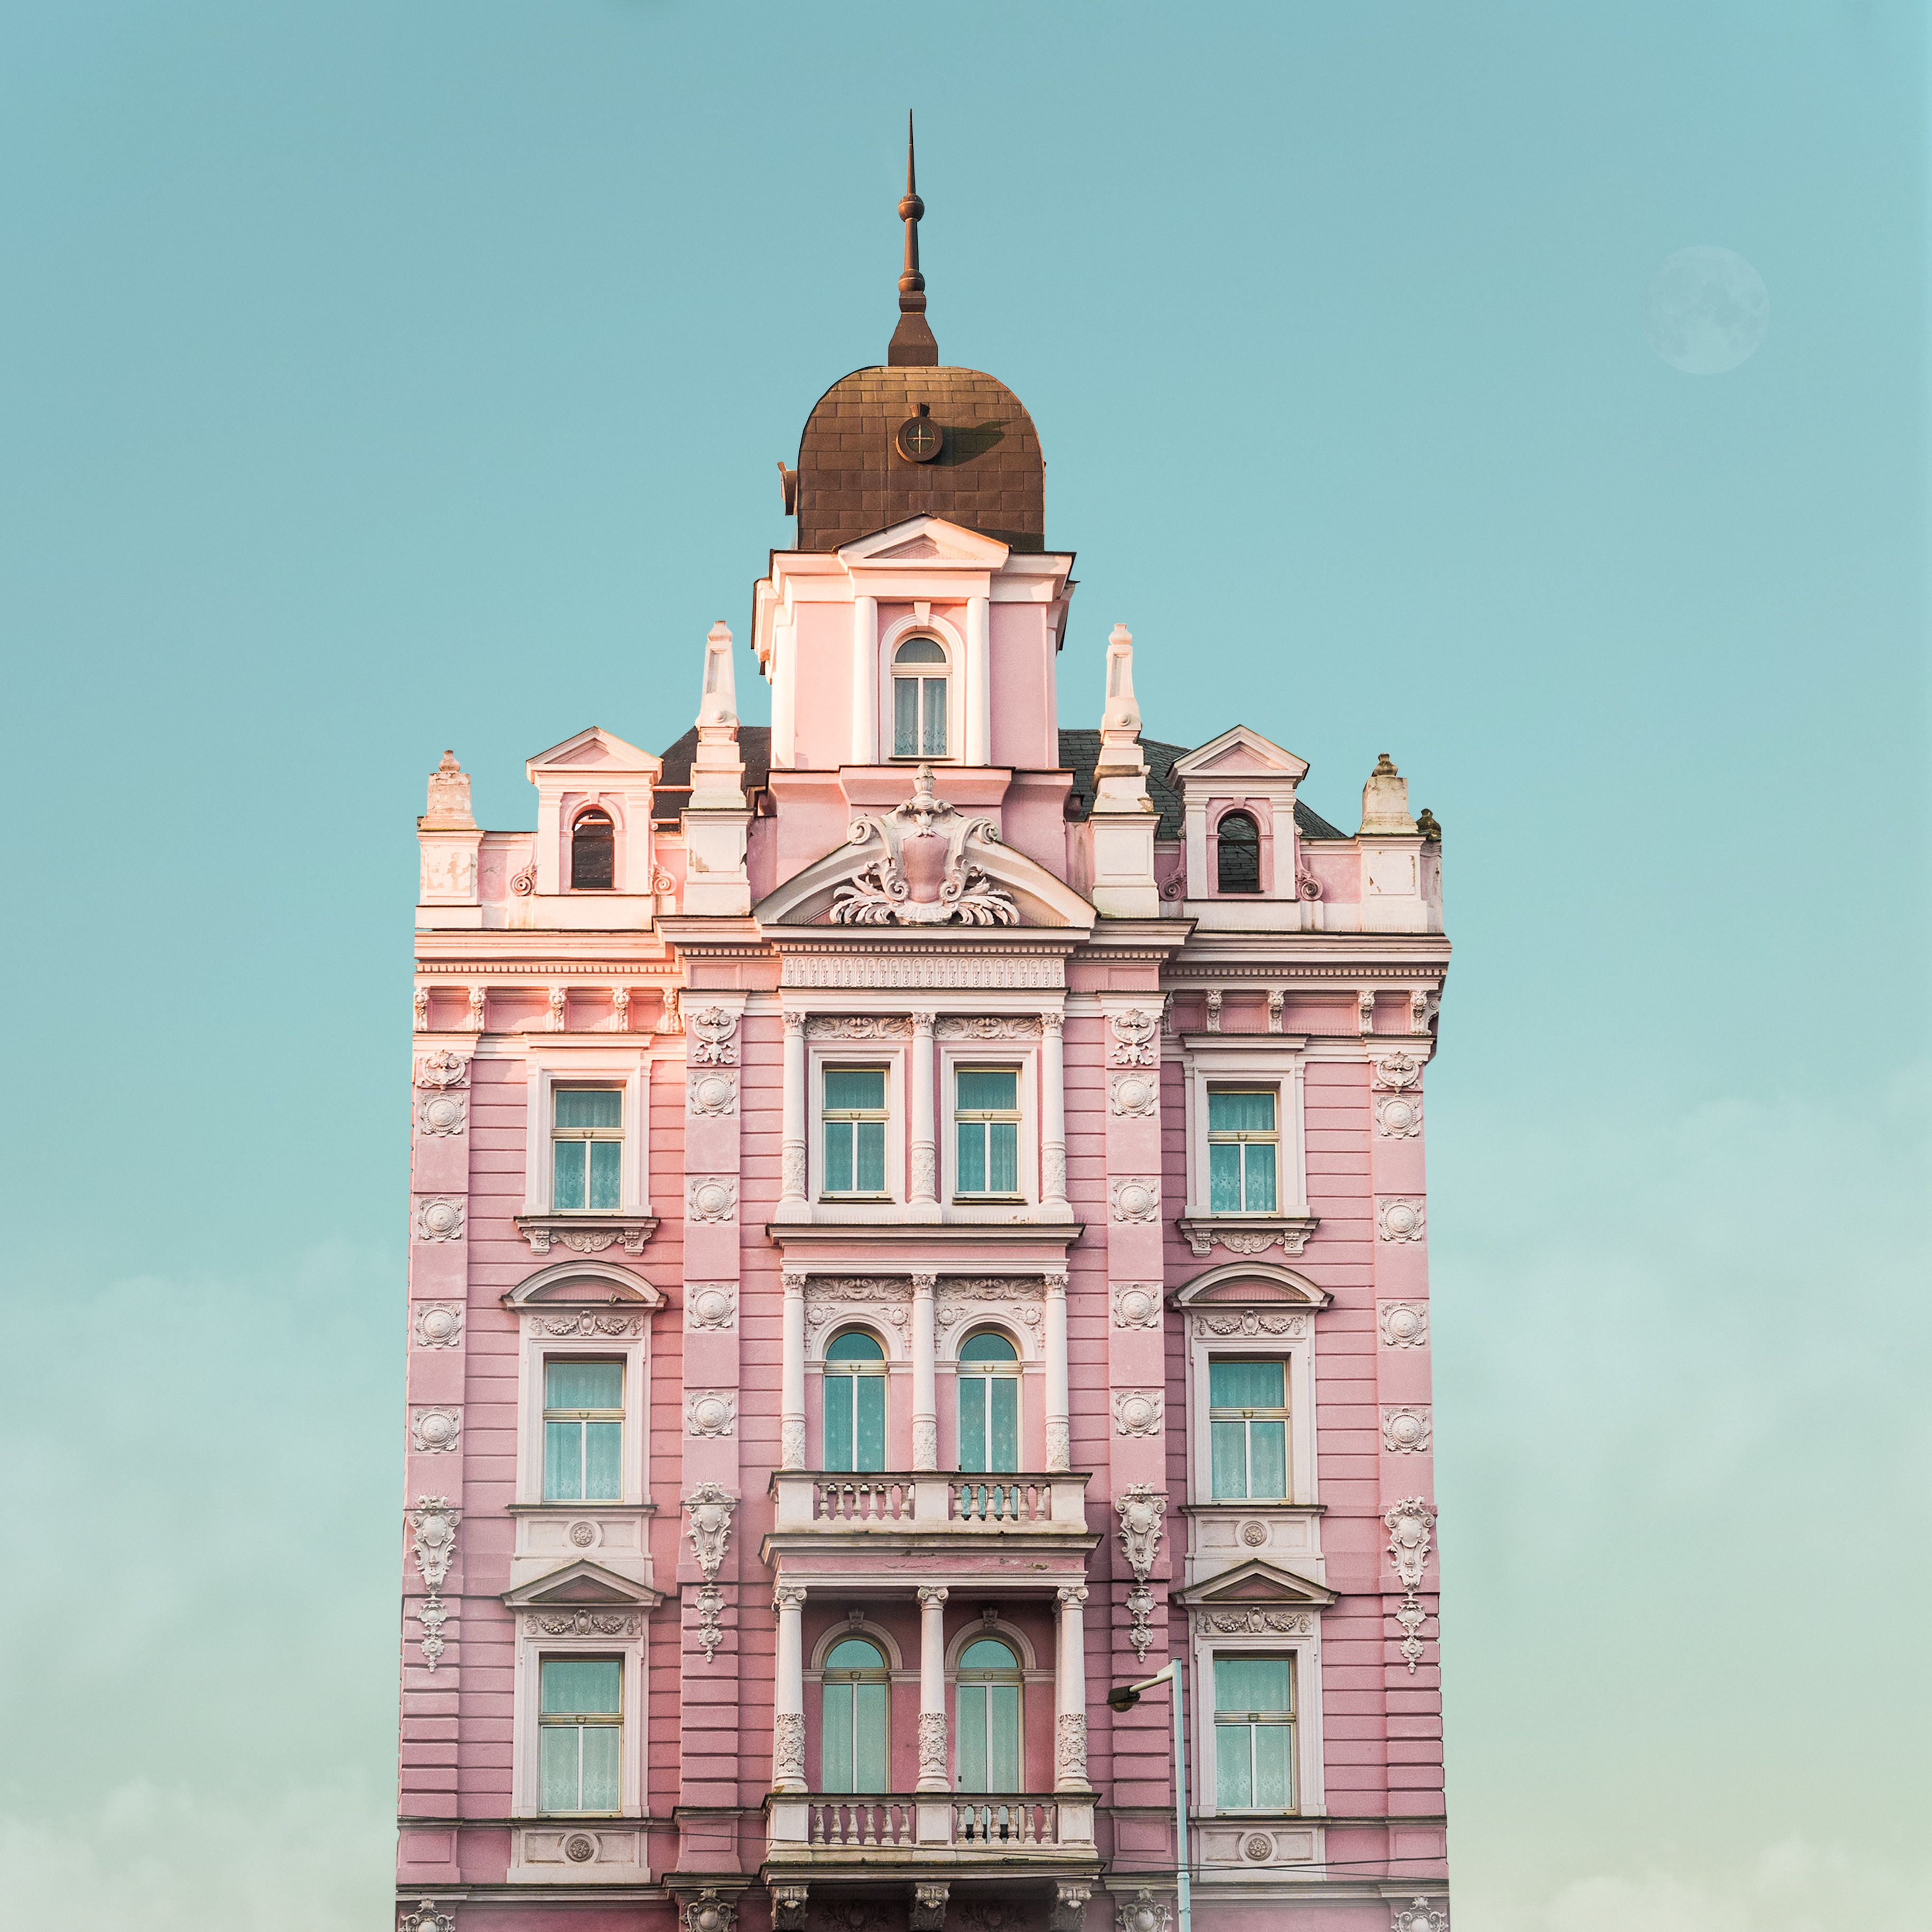 10 Wes Anderson Locations Around the World That Every Fan Should Visit